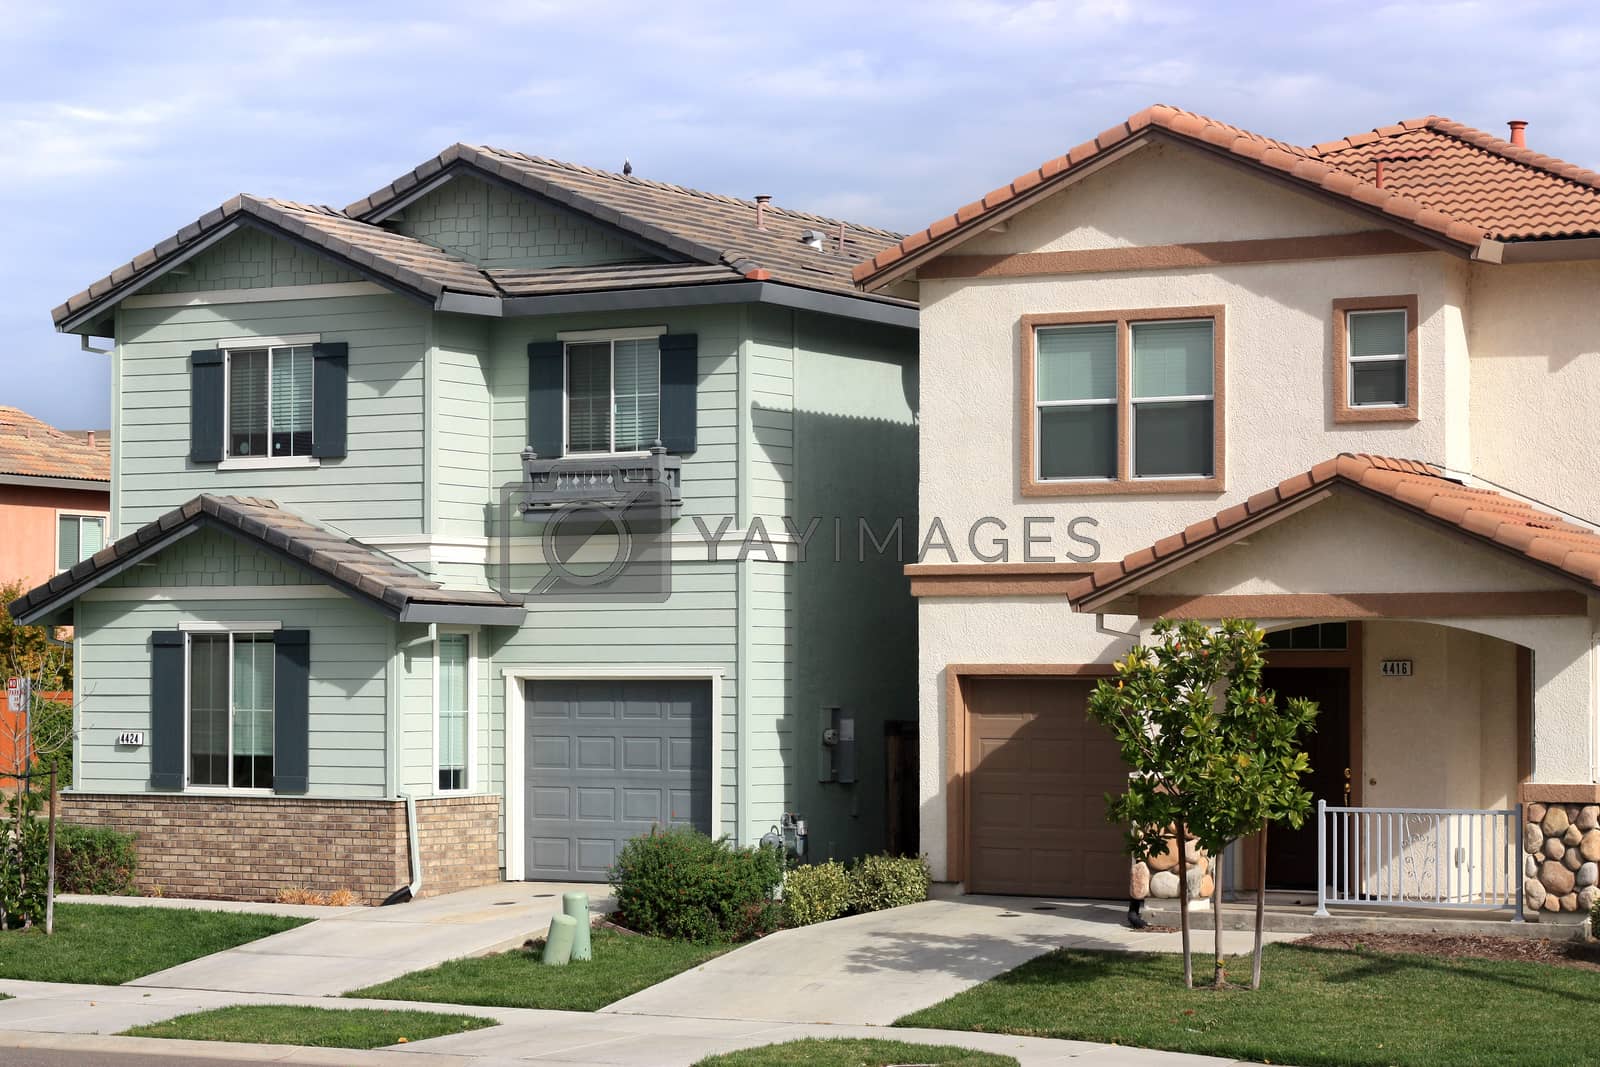 Royalty free image of Houses in suburban neighborhood  by ziss